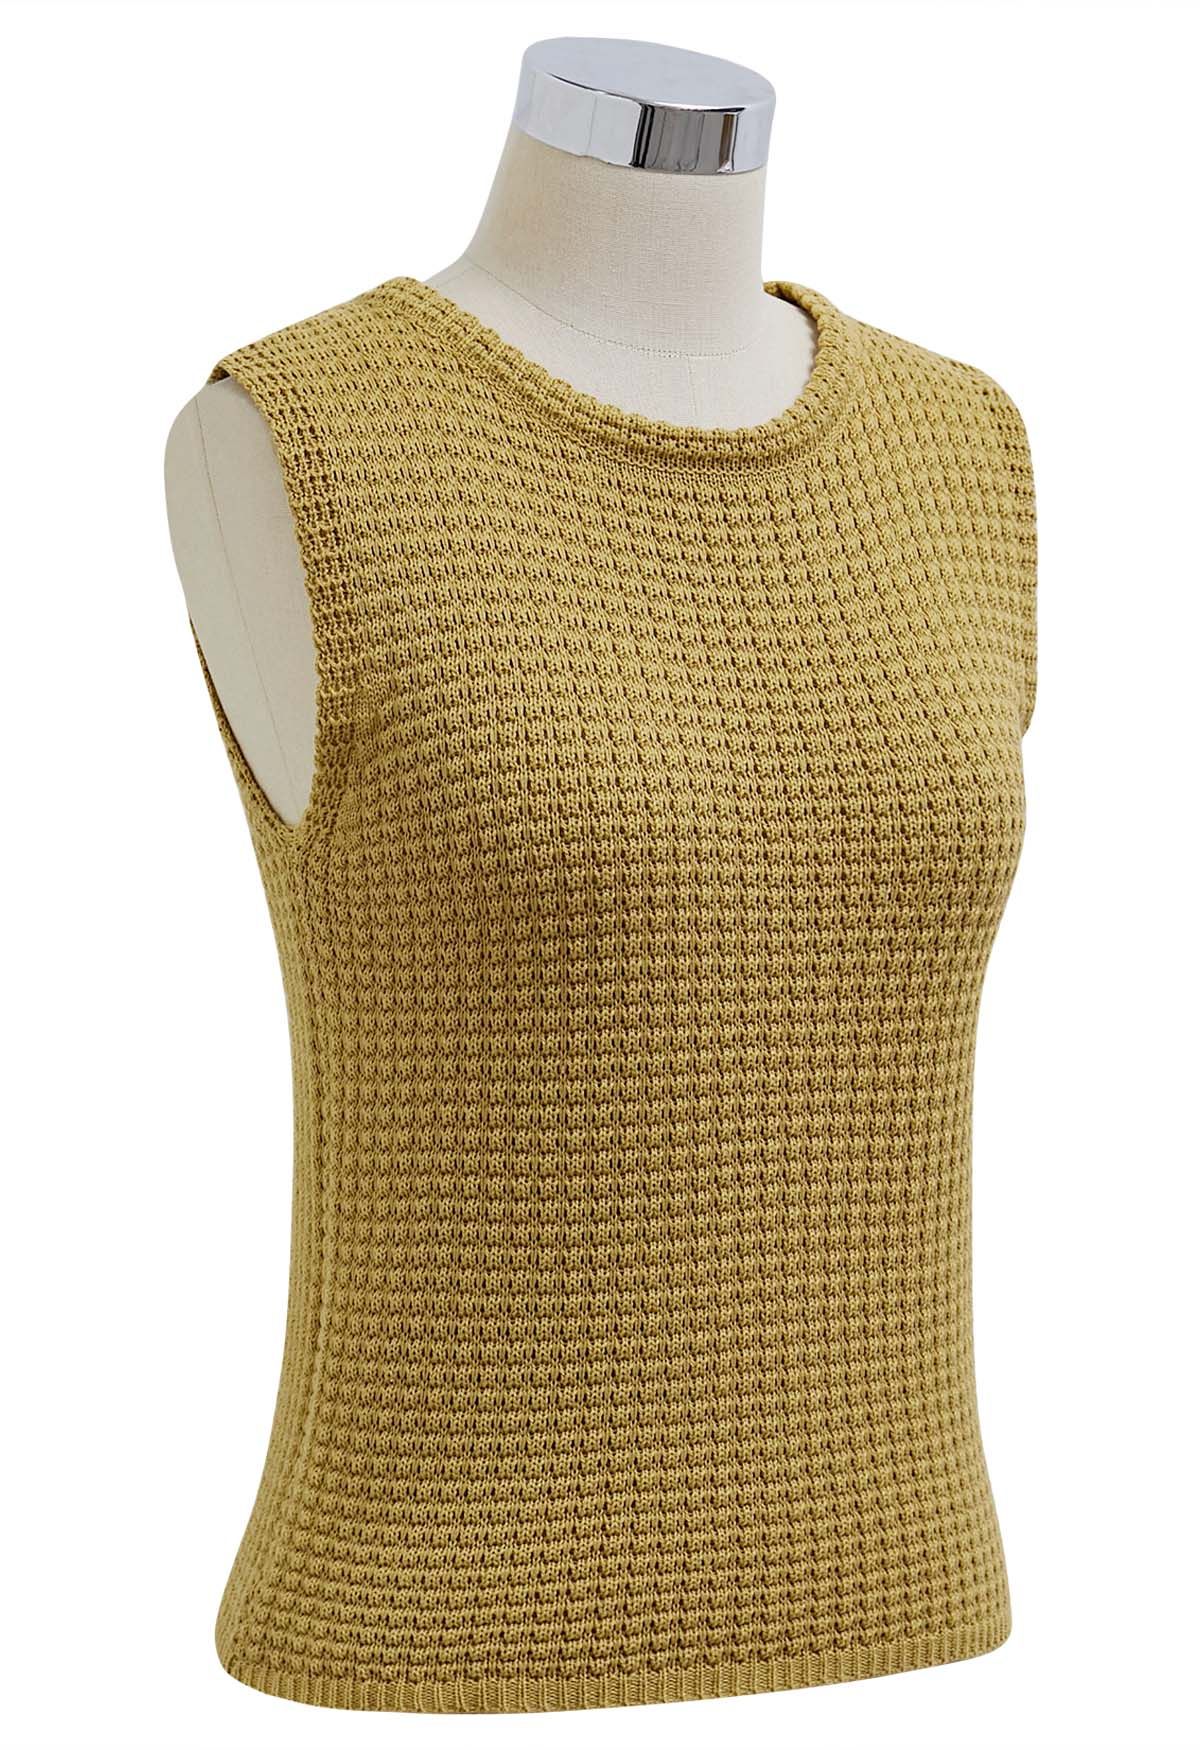 Solid Color Openwork Knit Sleeveless Top in Mustard